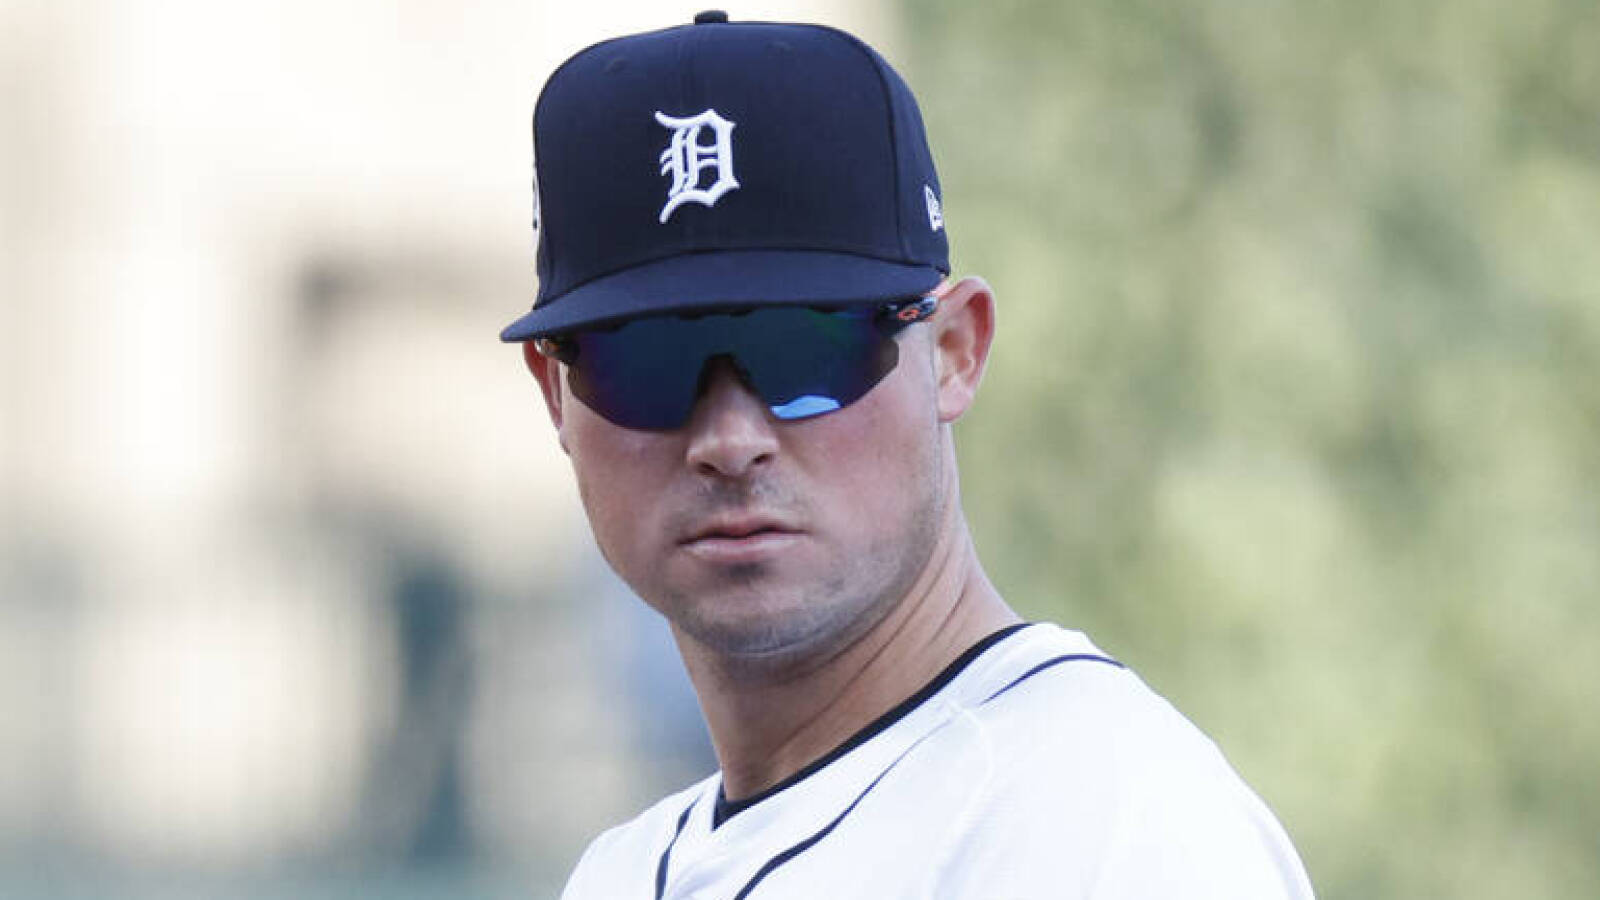 Tigers manager on struggling 1B: 'The next stop is next to me'